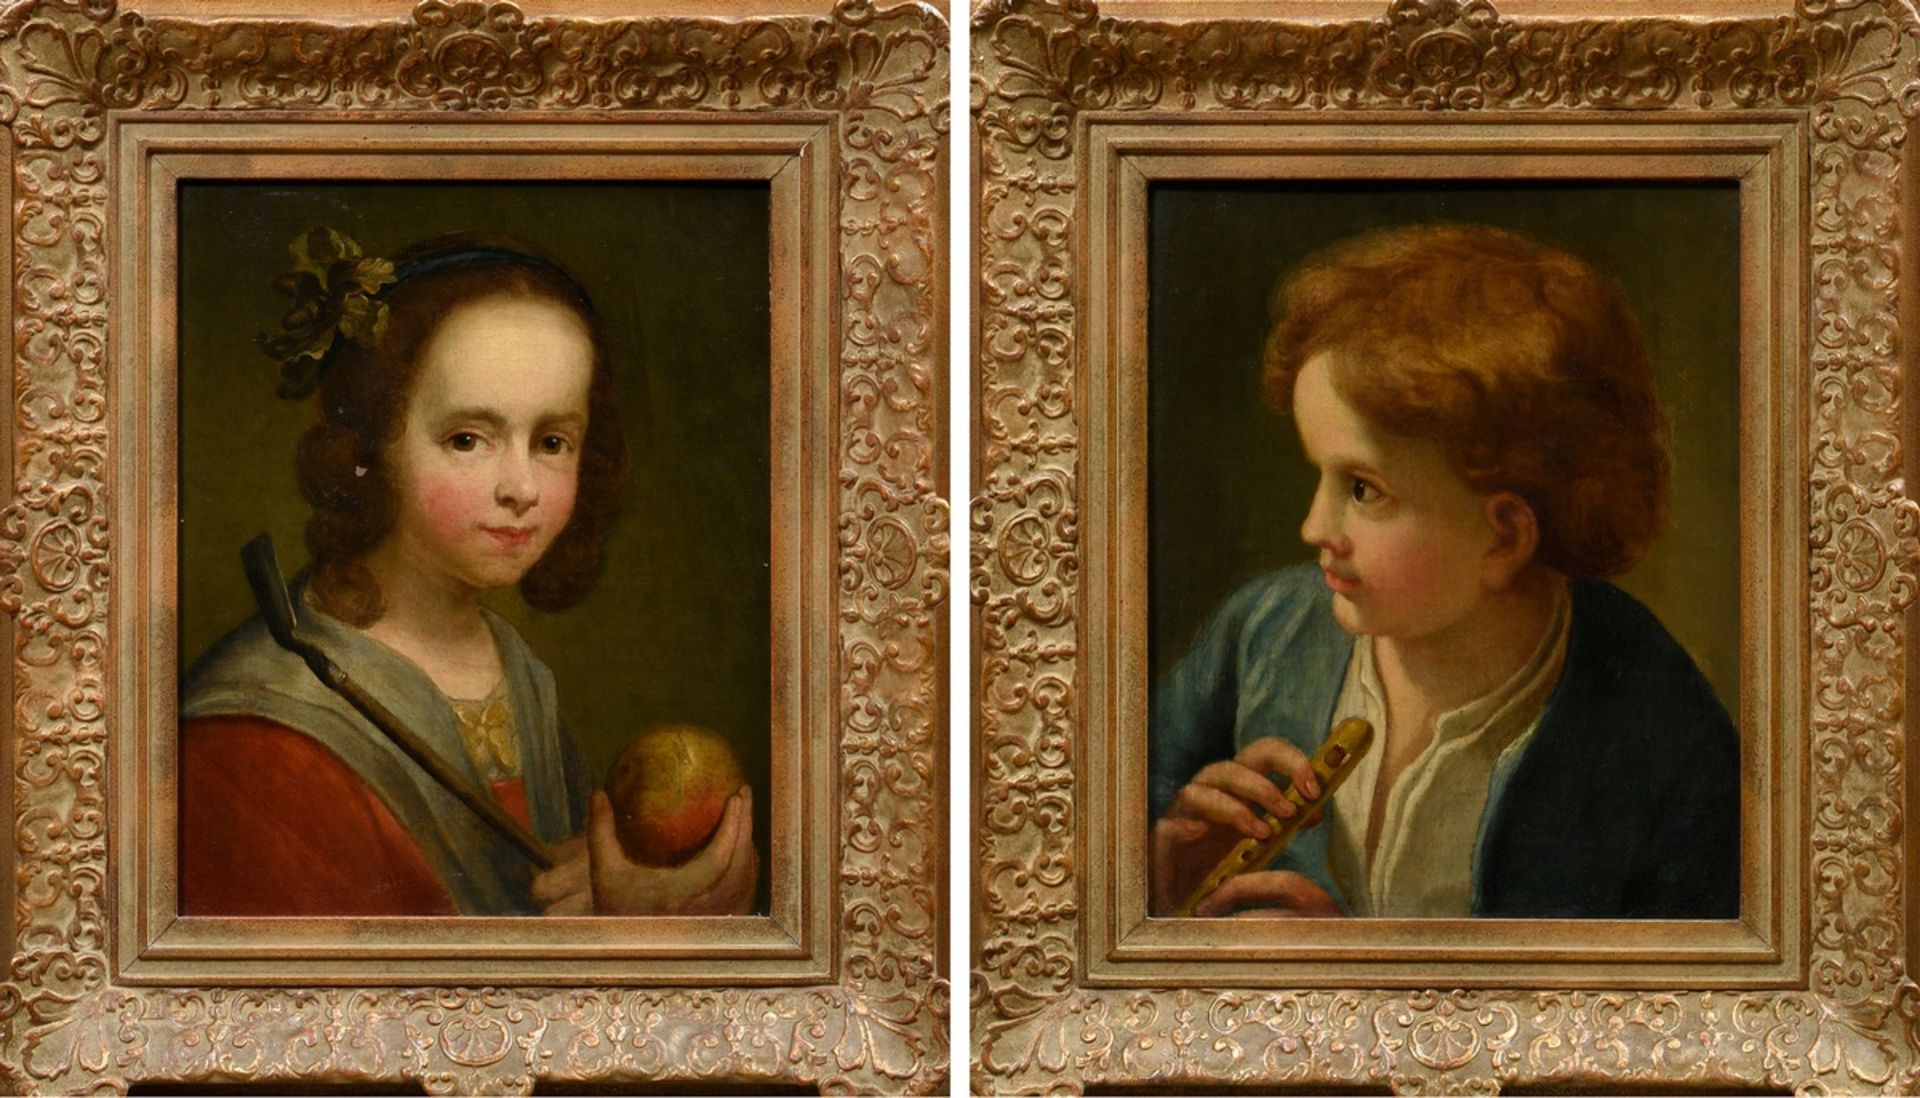 Pair of "Child Portraits" by an unknown painter of the 18th/19th c., oil/canvas on wood, magnificen